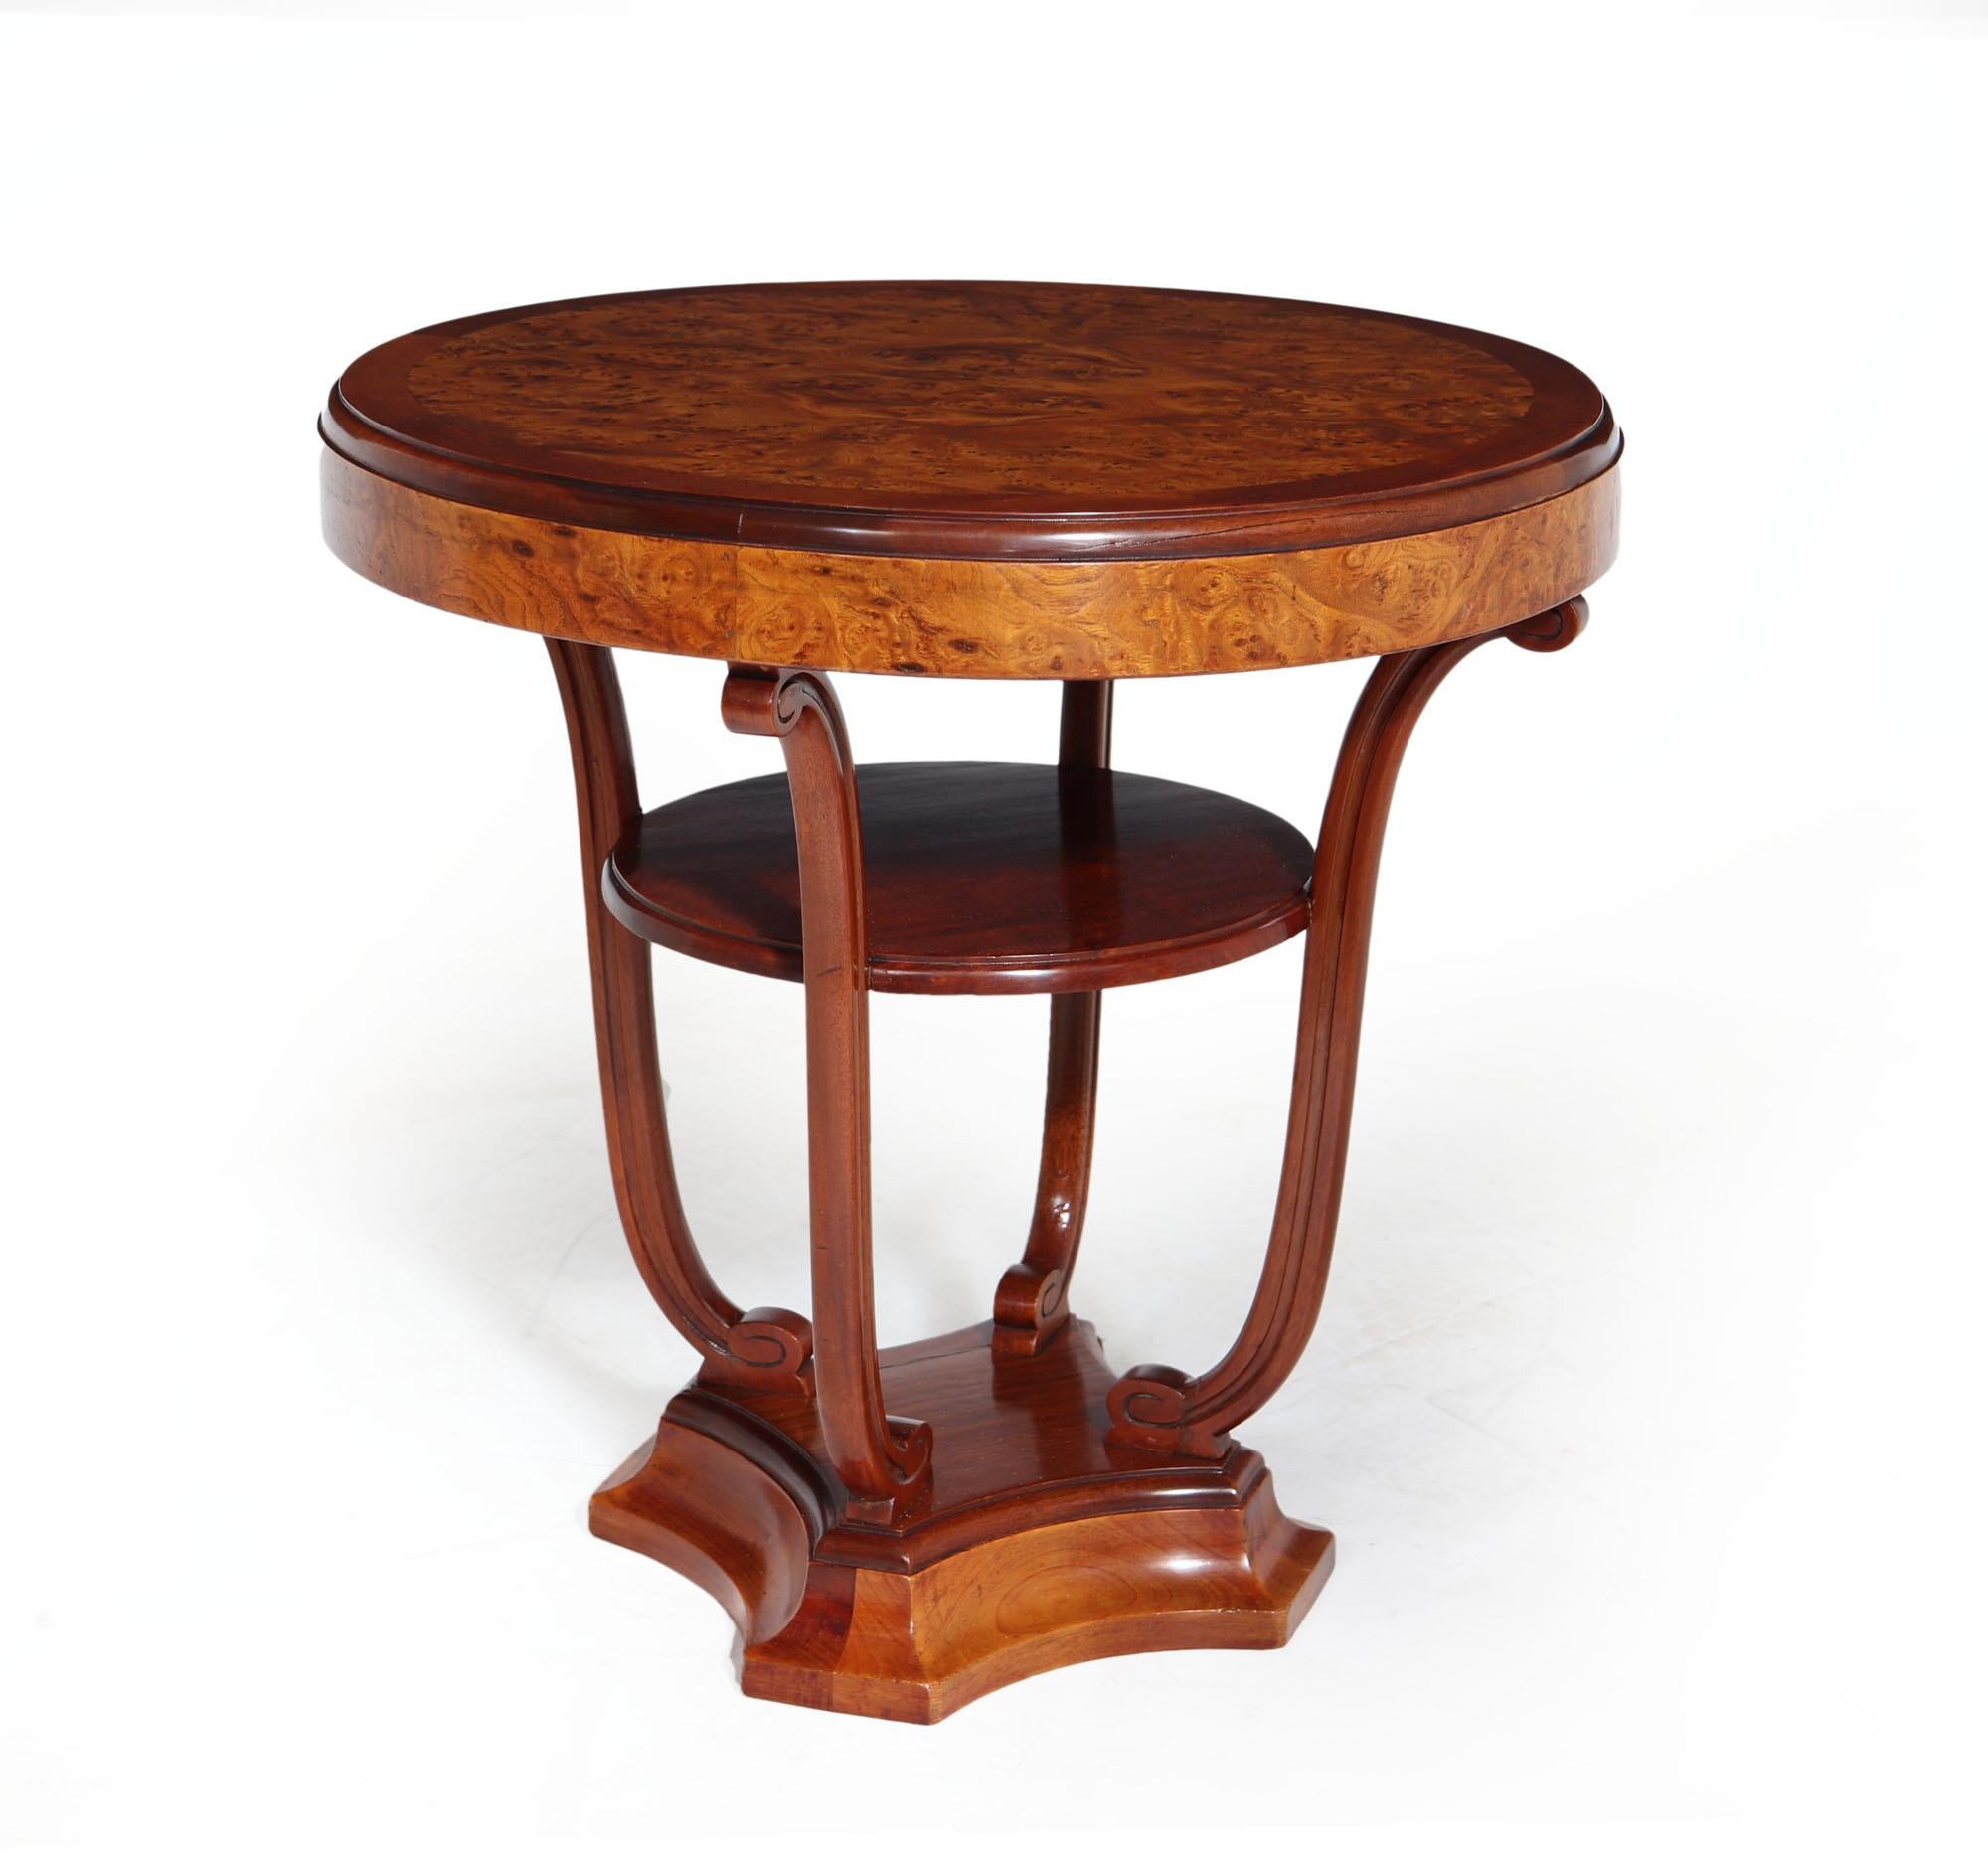 An exceptional quality and style centre table by Maurice Dufrene produced in Paris France 1920-1925 this table has a quartered burr walnut with solid mahogany surround, The table has a centre shelf that is supported by four solid mahogany gently